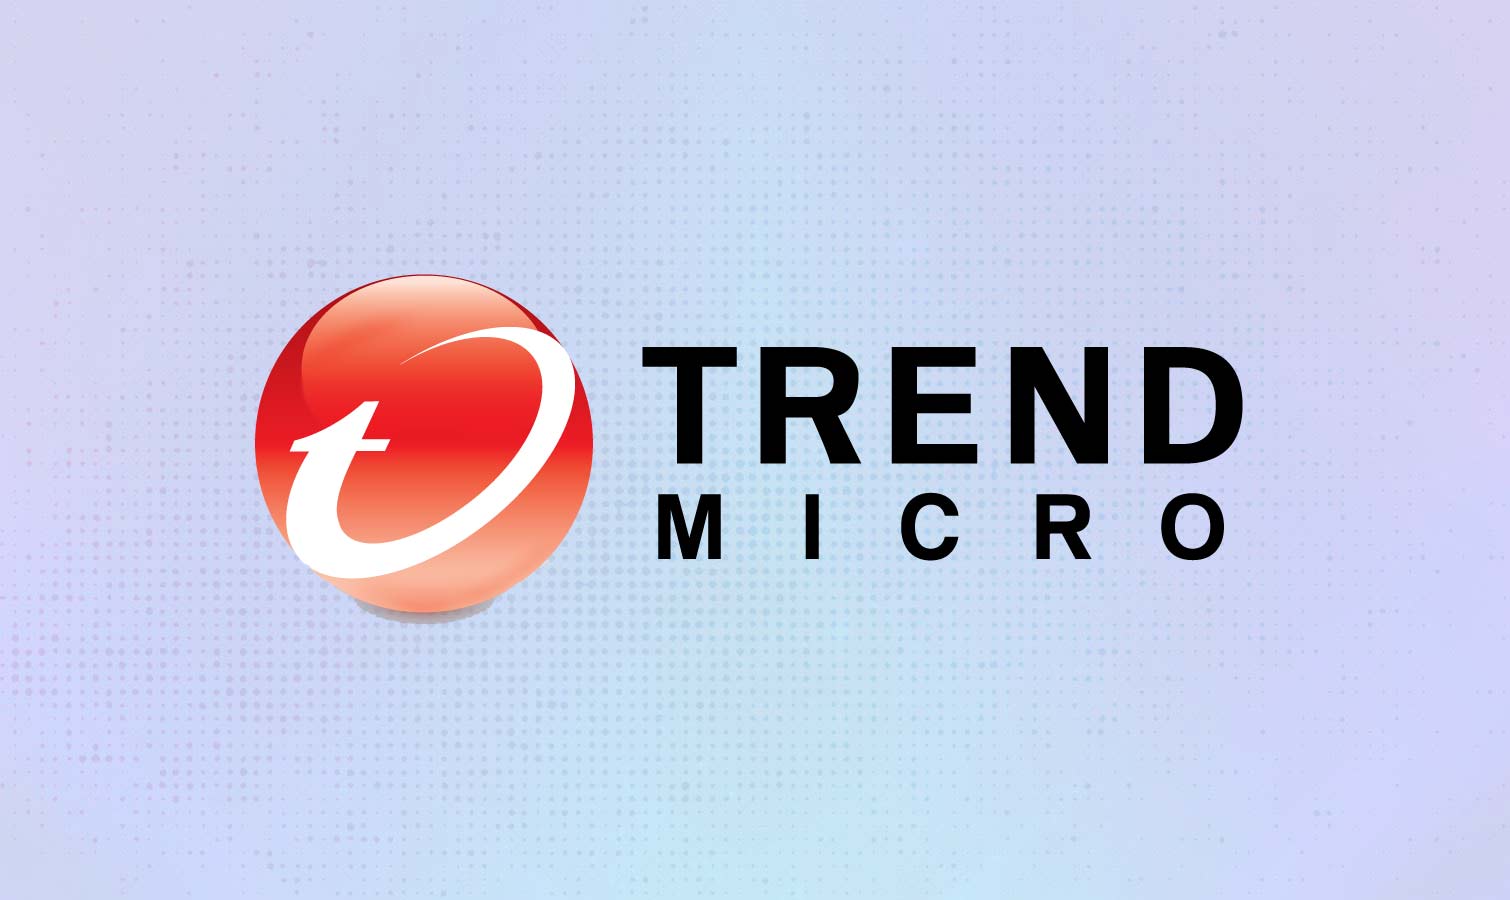 trend micro download protection service